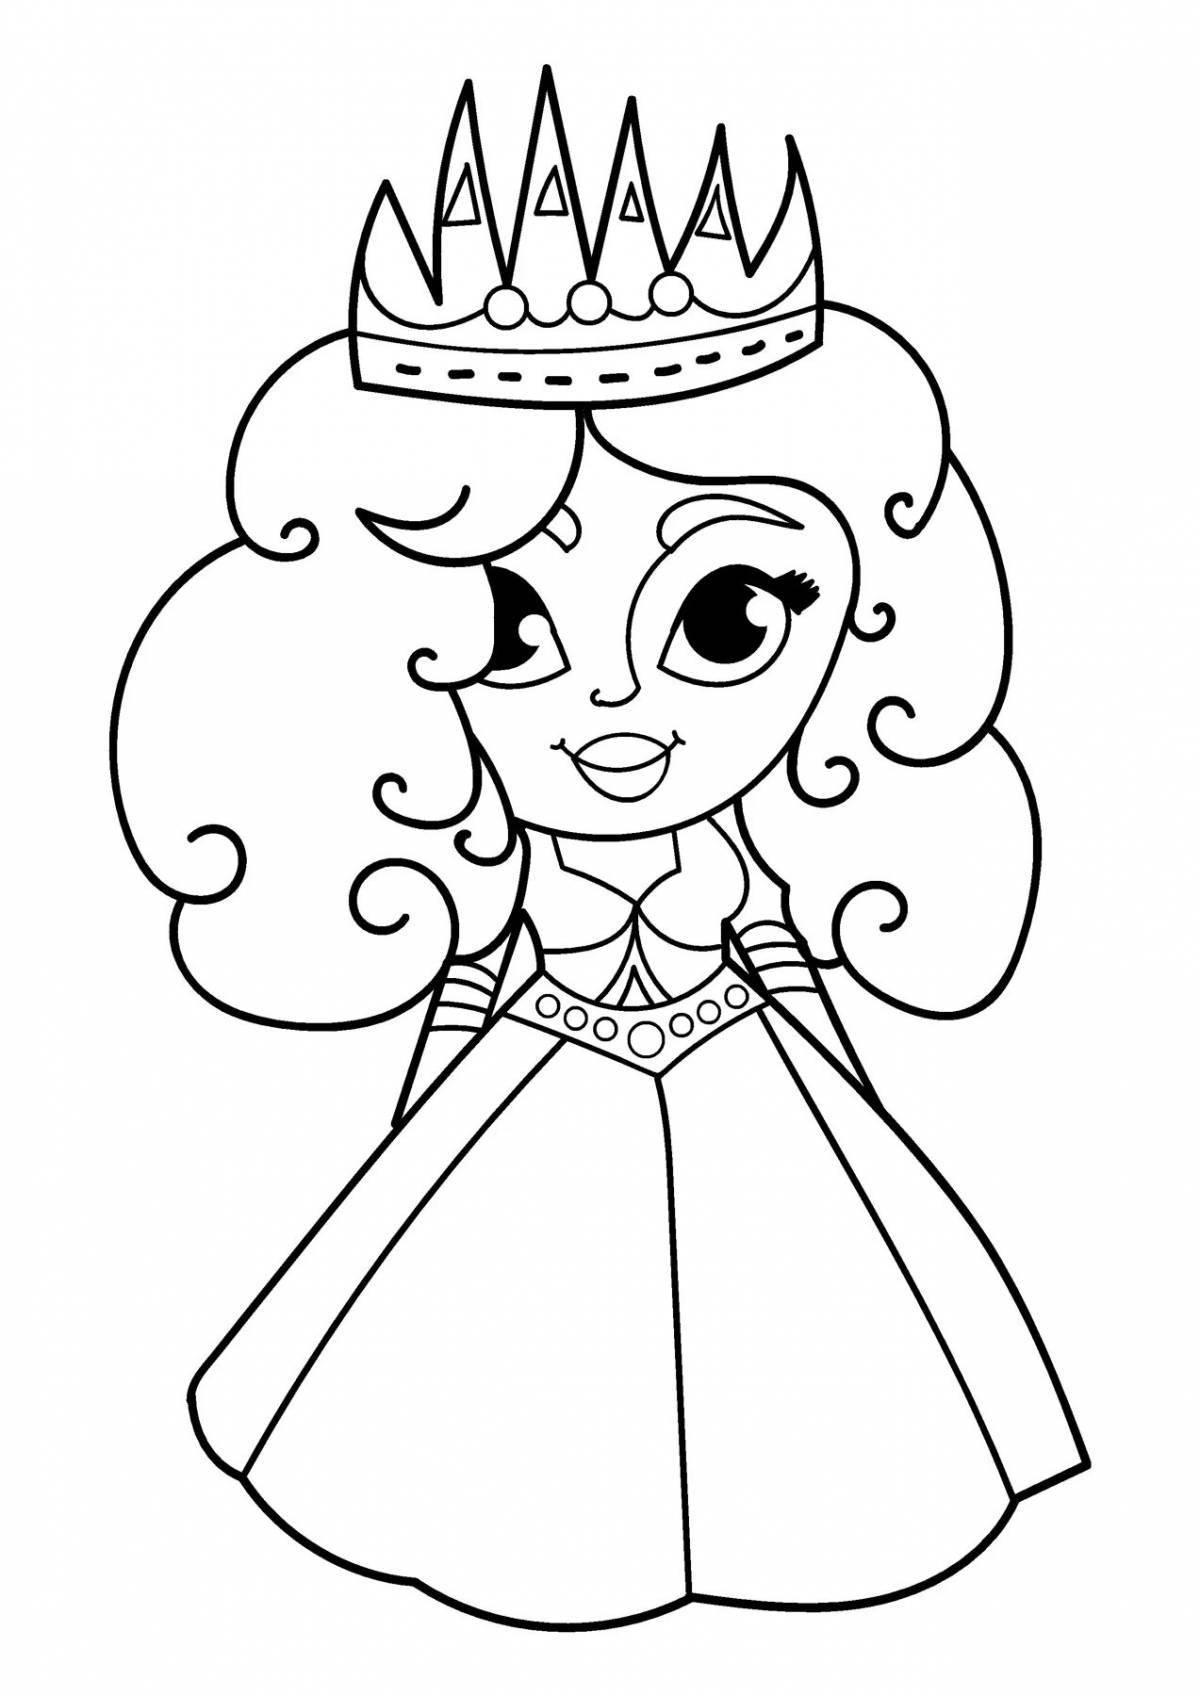 Majestic coloring for girls 5 years, princess